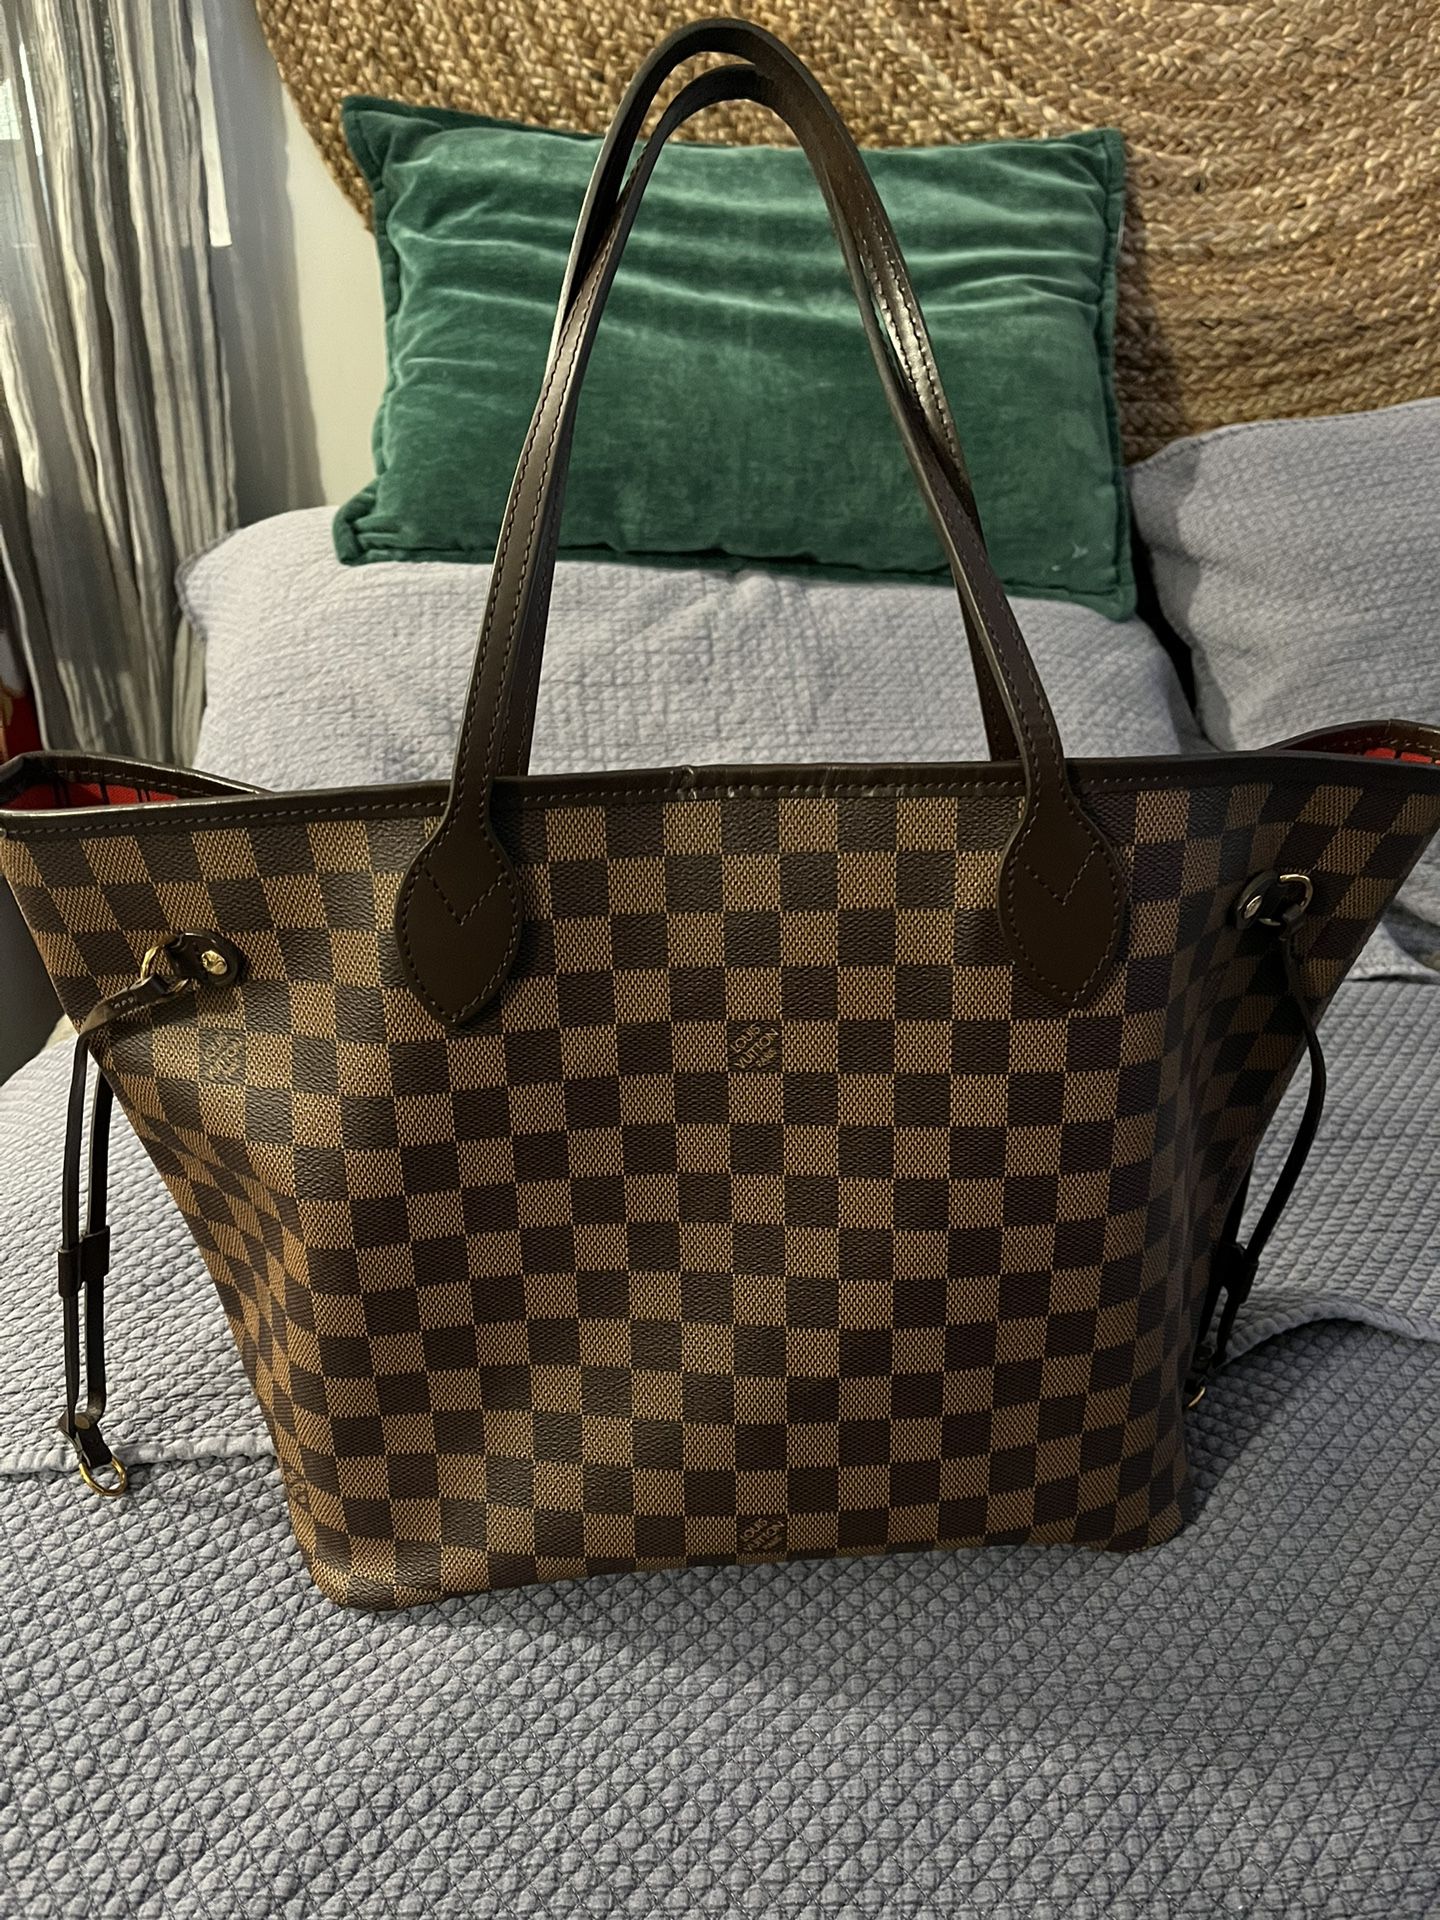 Louis Vuitton Neverfull PM Shoulder Bag VI3067 10293 for Sale in Plano, TX  - OfferUp